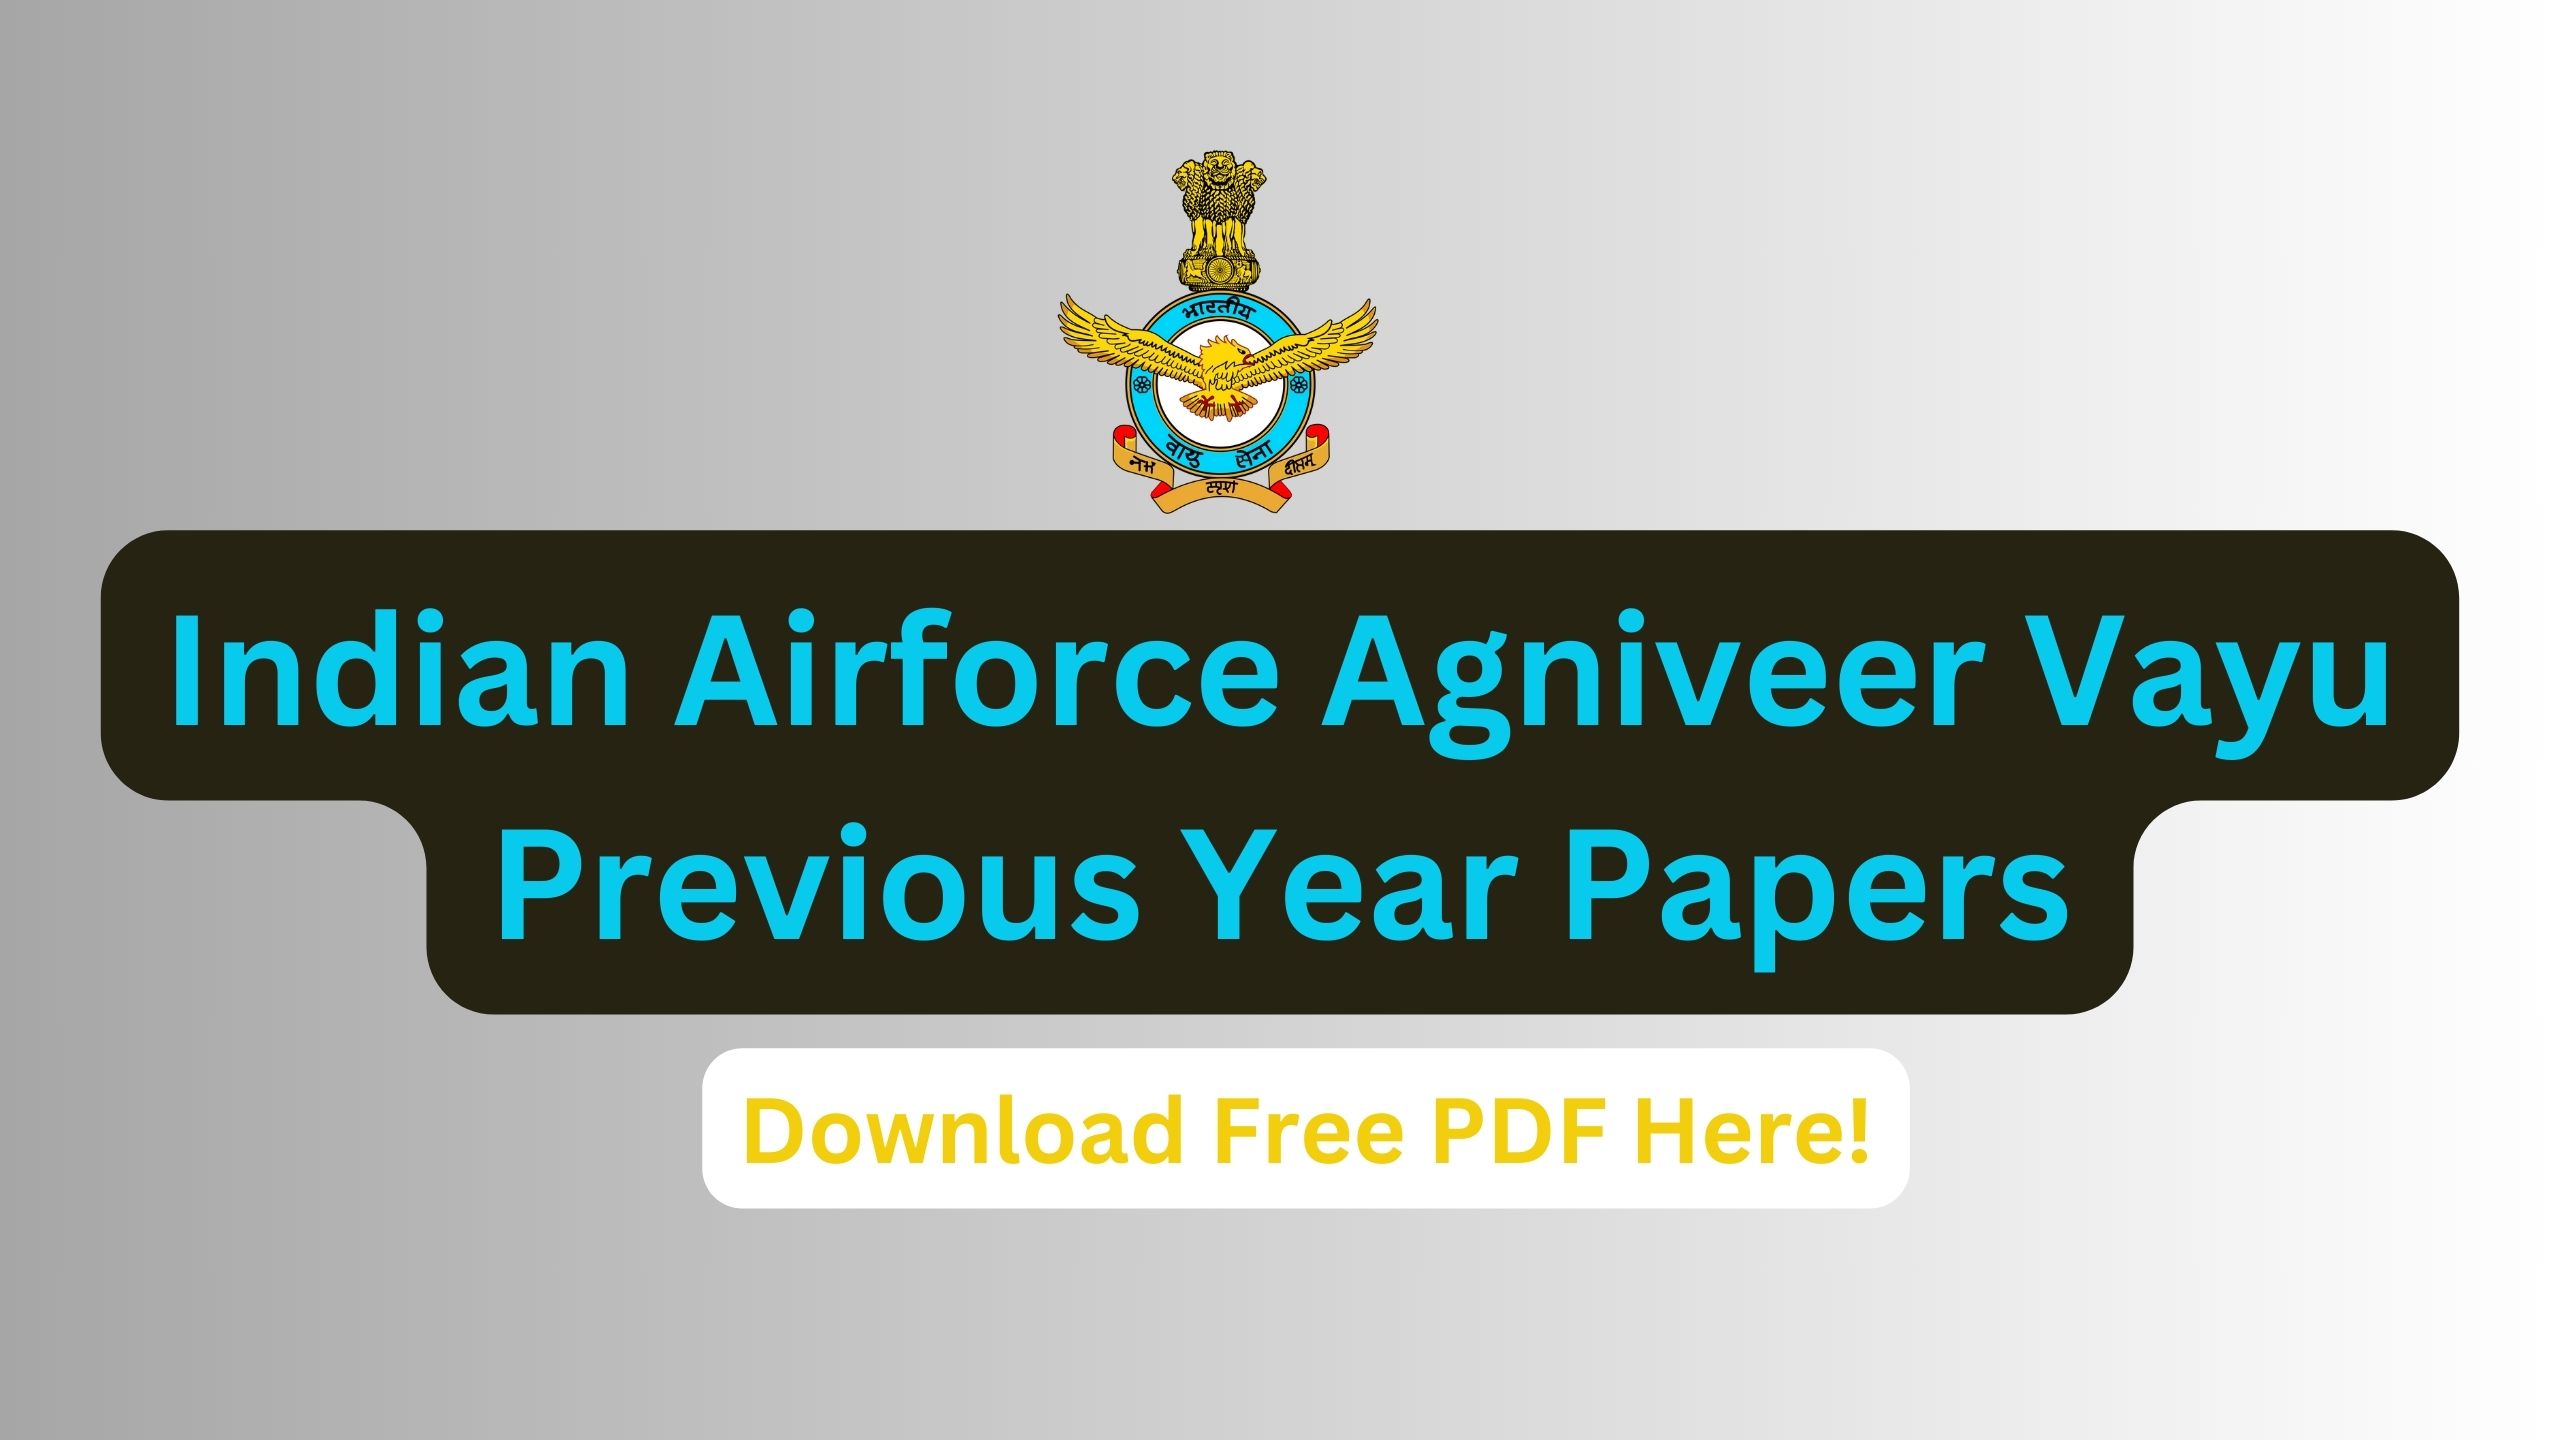 Indian Airforce Agniveer Vayu Previous Year Papers